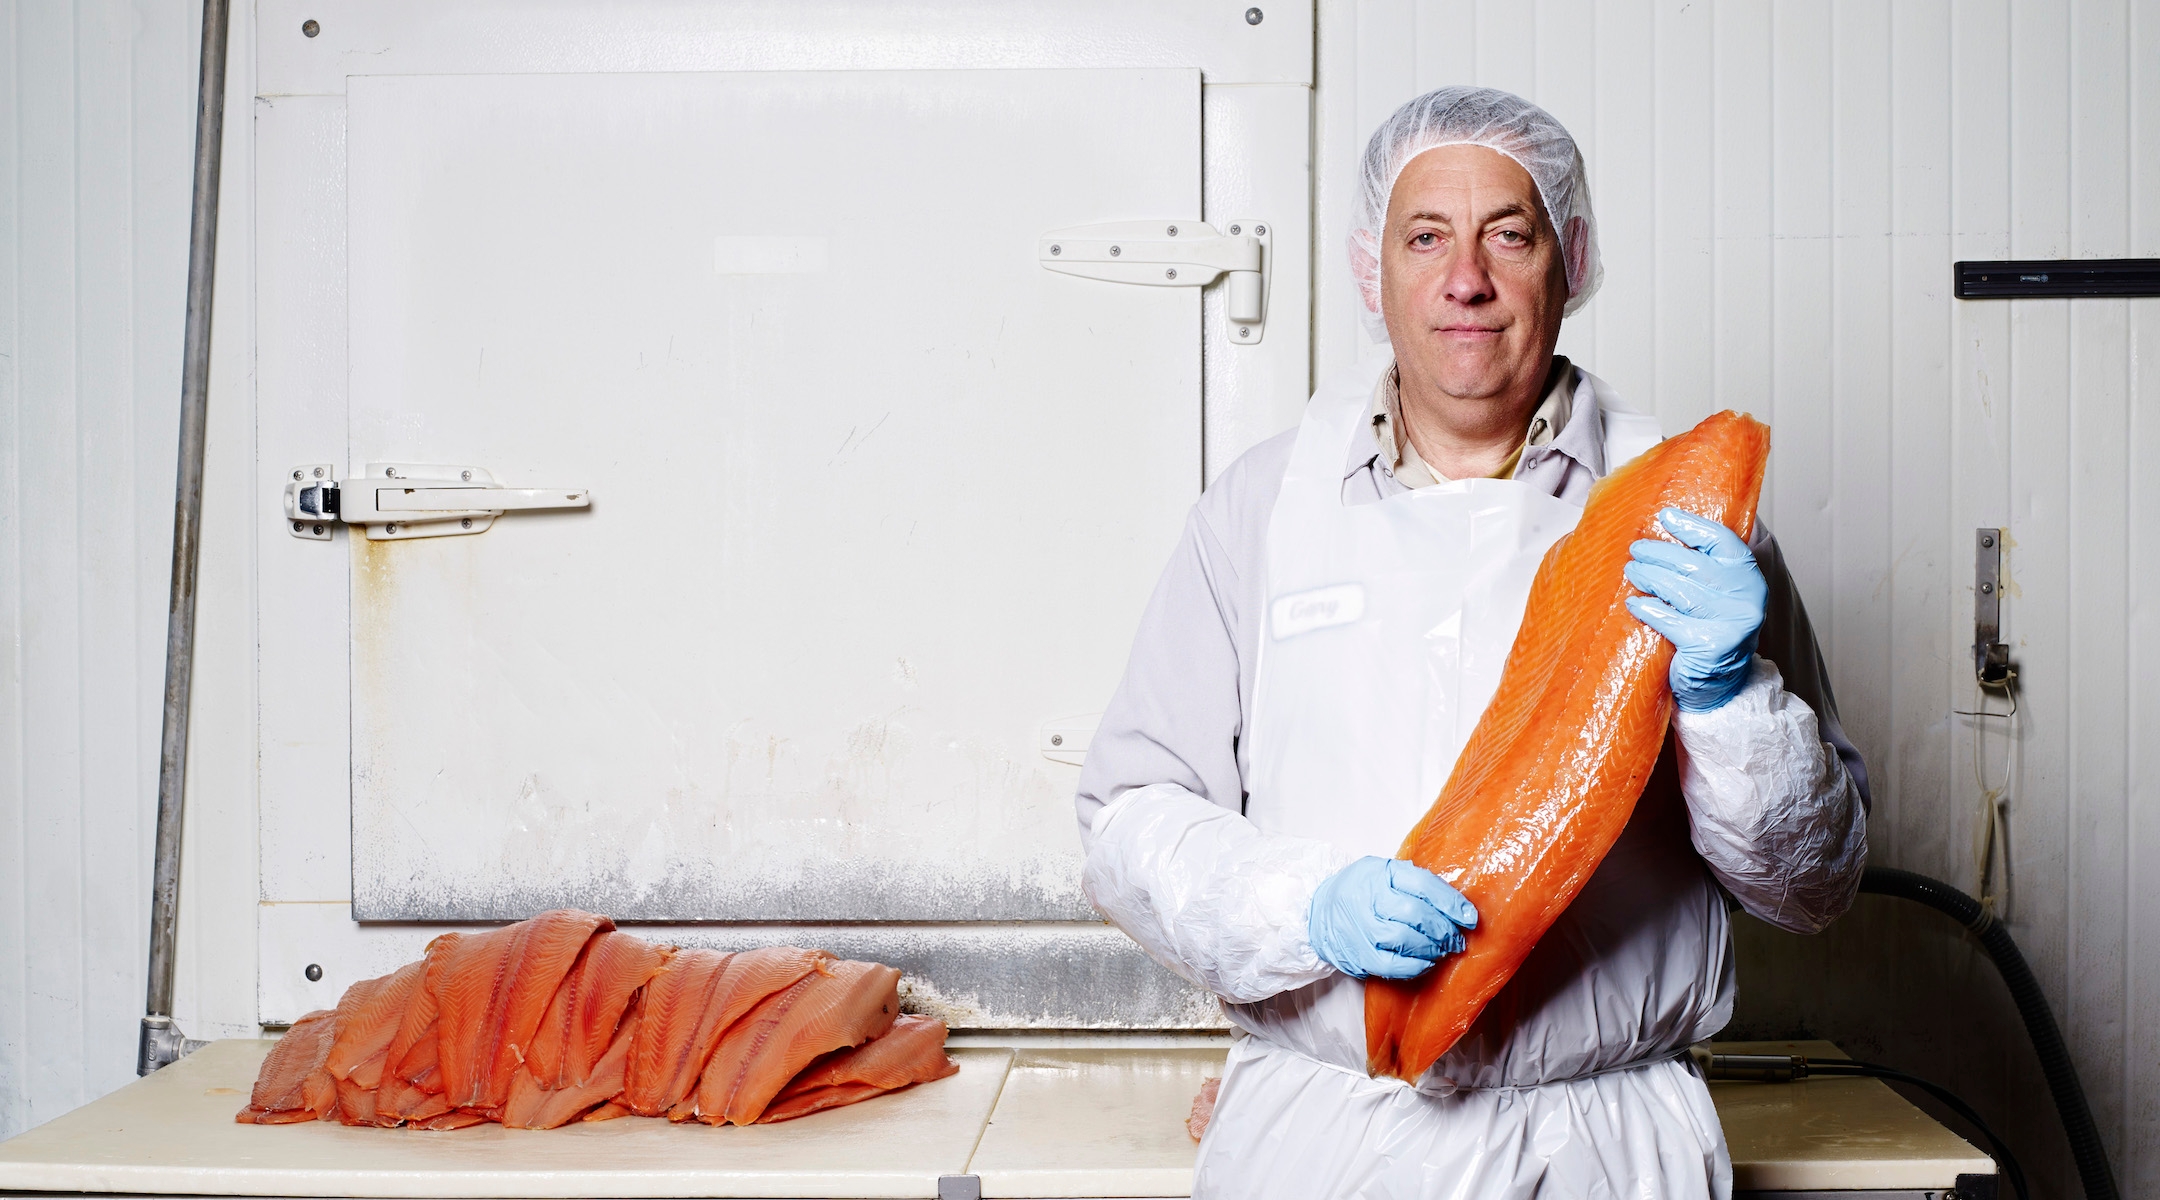 Gary Brownstein, one of Acme Smoked Fish’s production managers, started at the company in 1975. He is the grandson of Harry Brownstein, the company’s founder. (Michael Harlan Turkell)